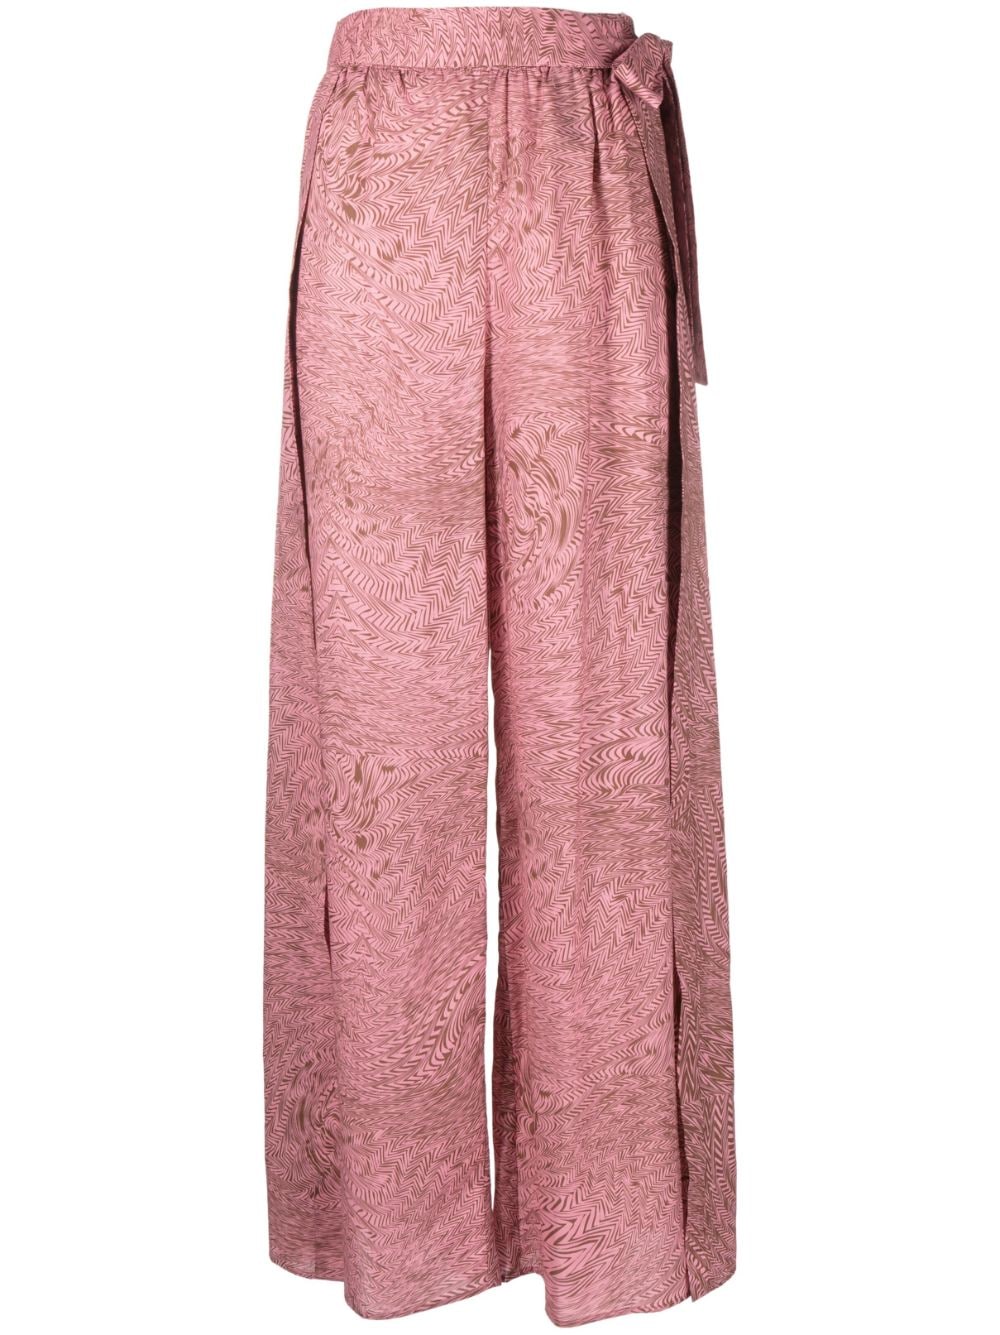 Federica Tosi side-tie wide-leg trousers - Pink von Federica Tosi